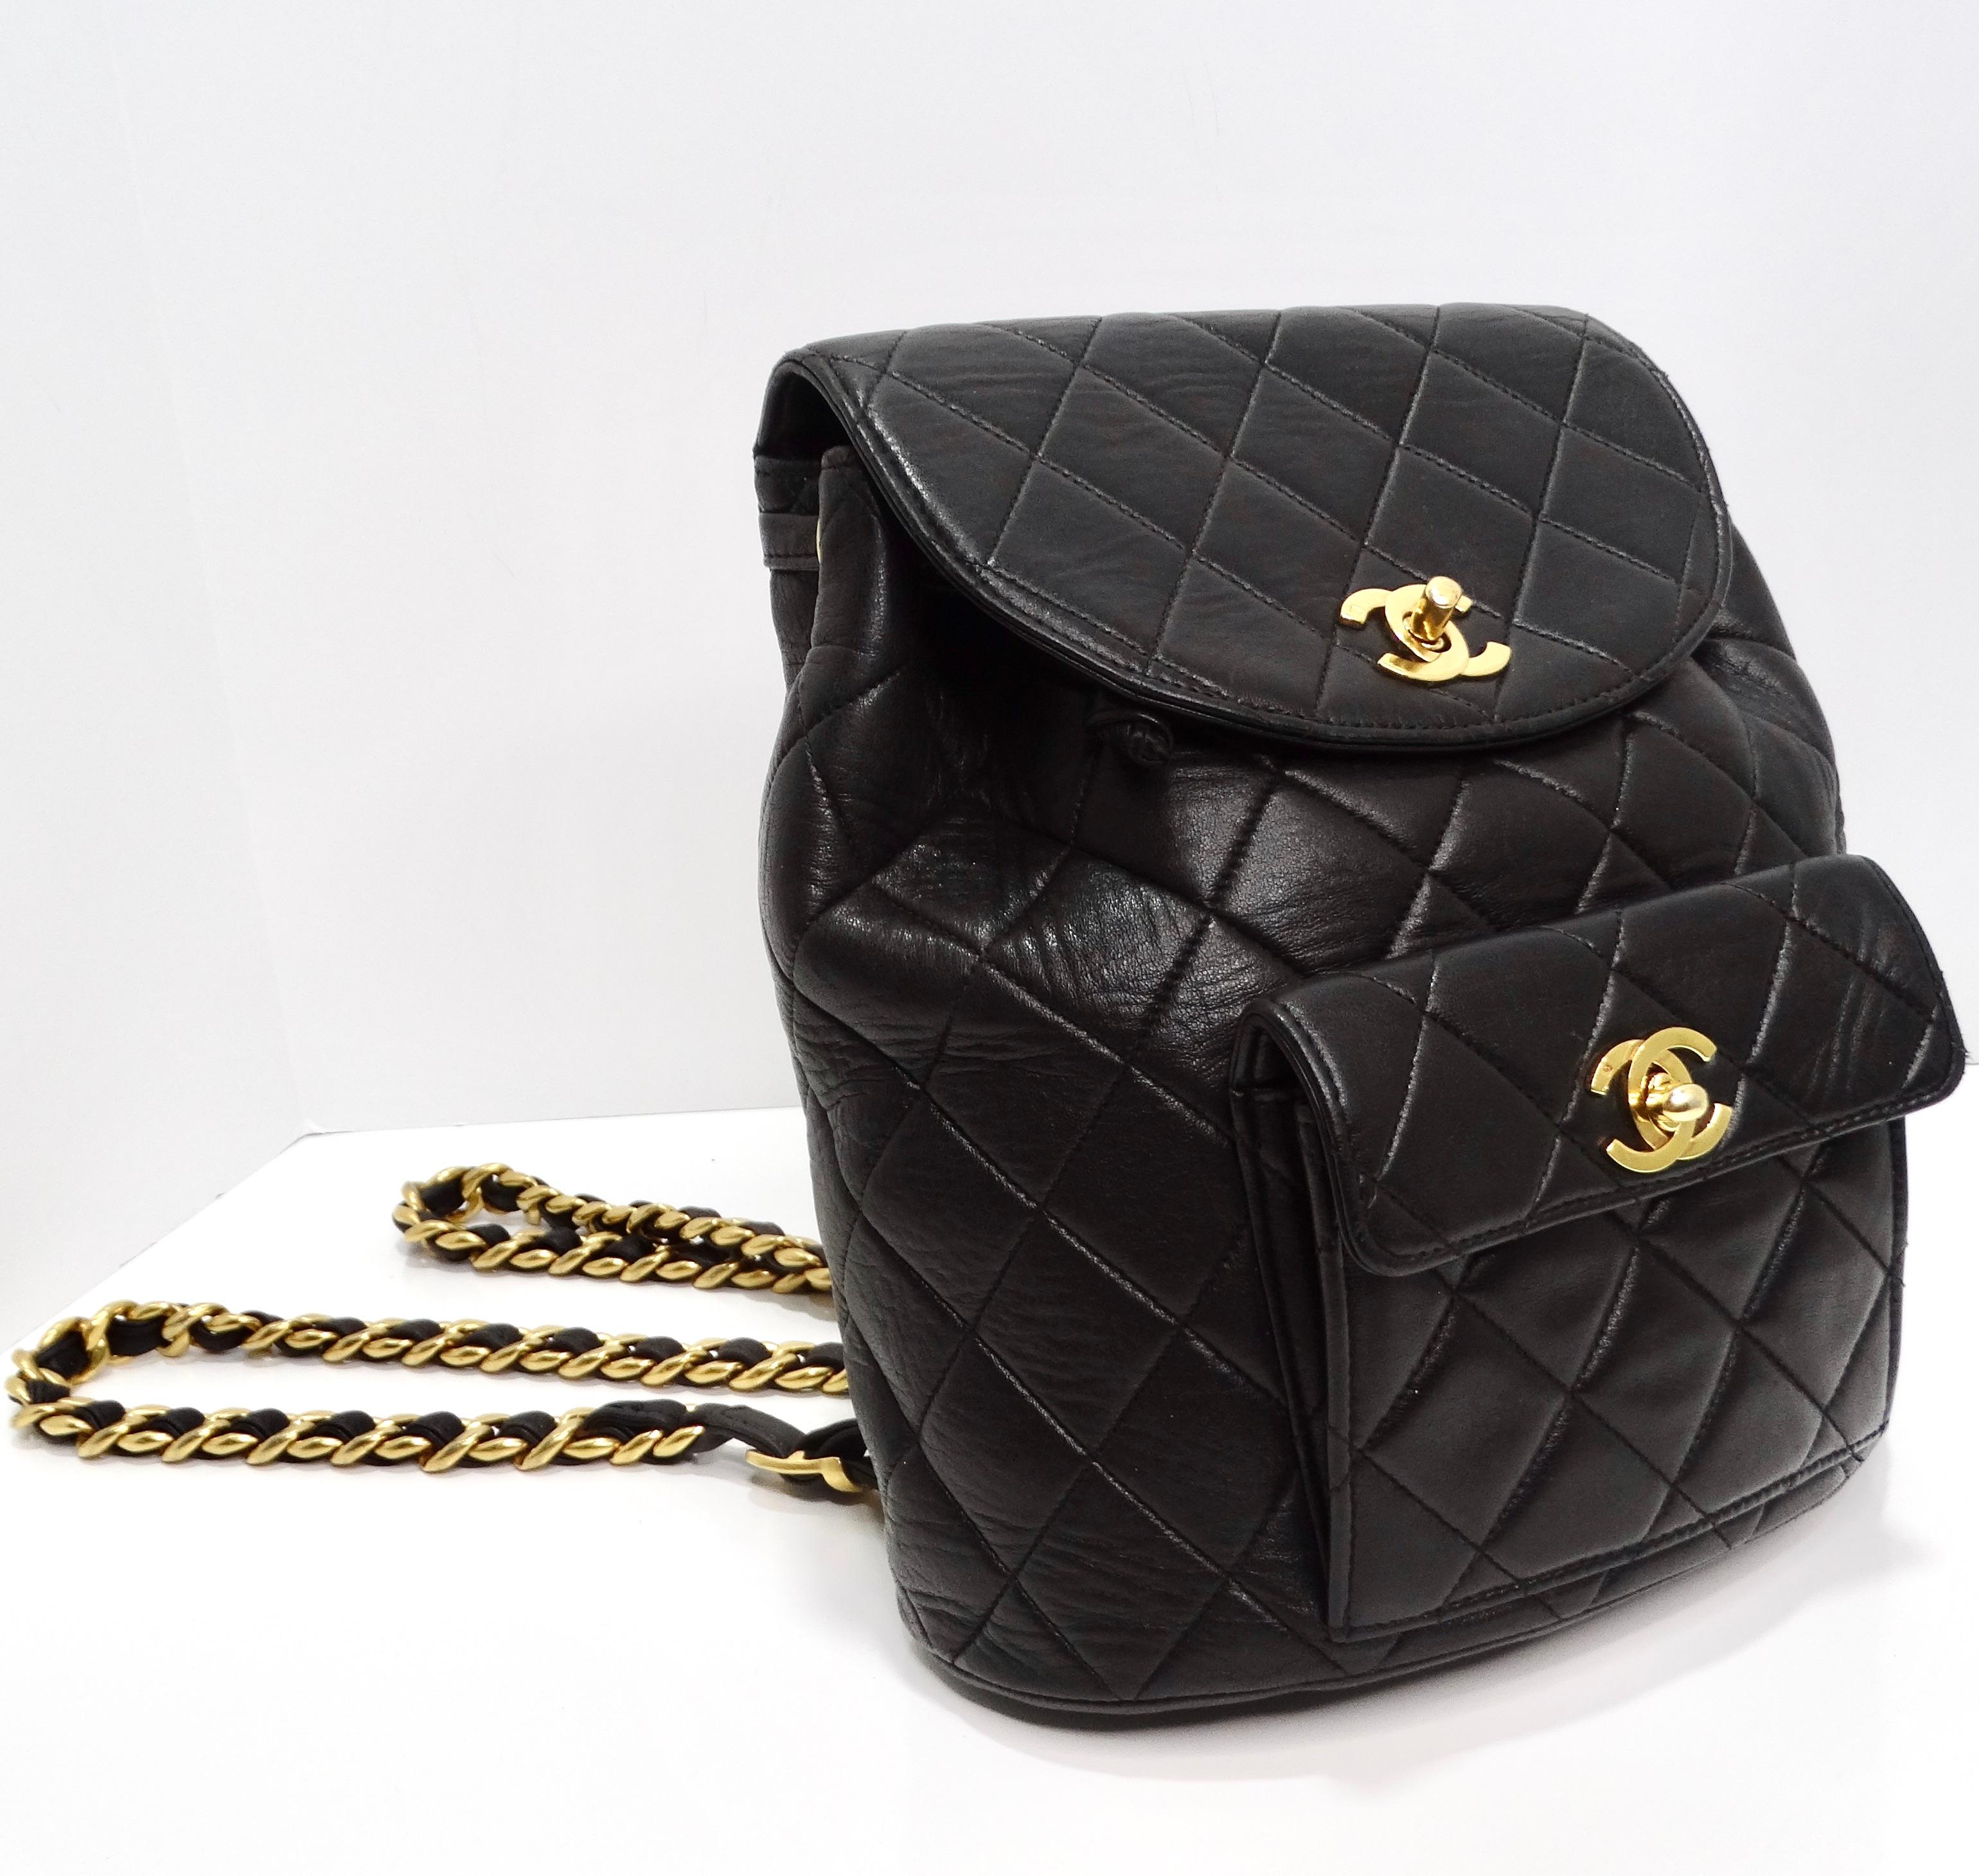 Chanel 1990s Lambskin Quilted Backpack In Excellent Condition For Sale In Scottsdale, AZ